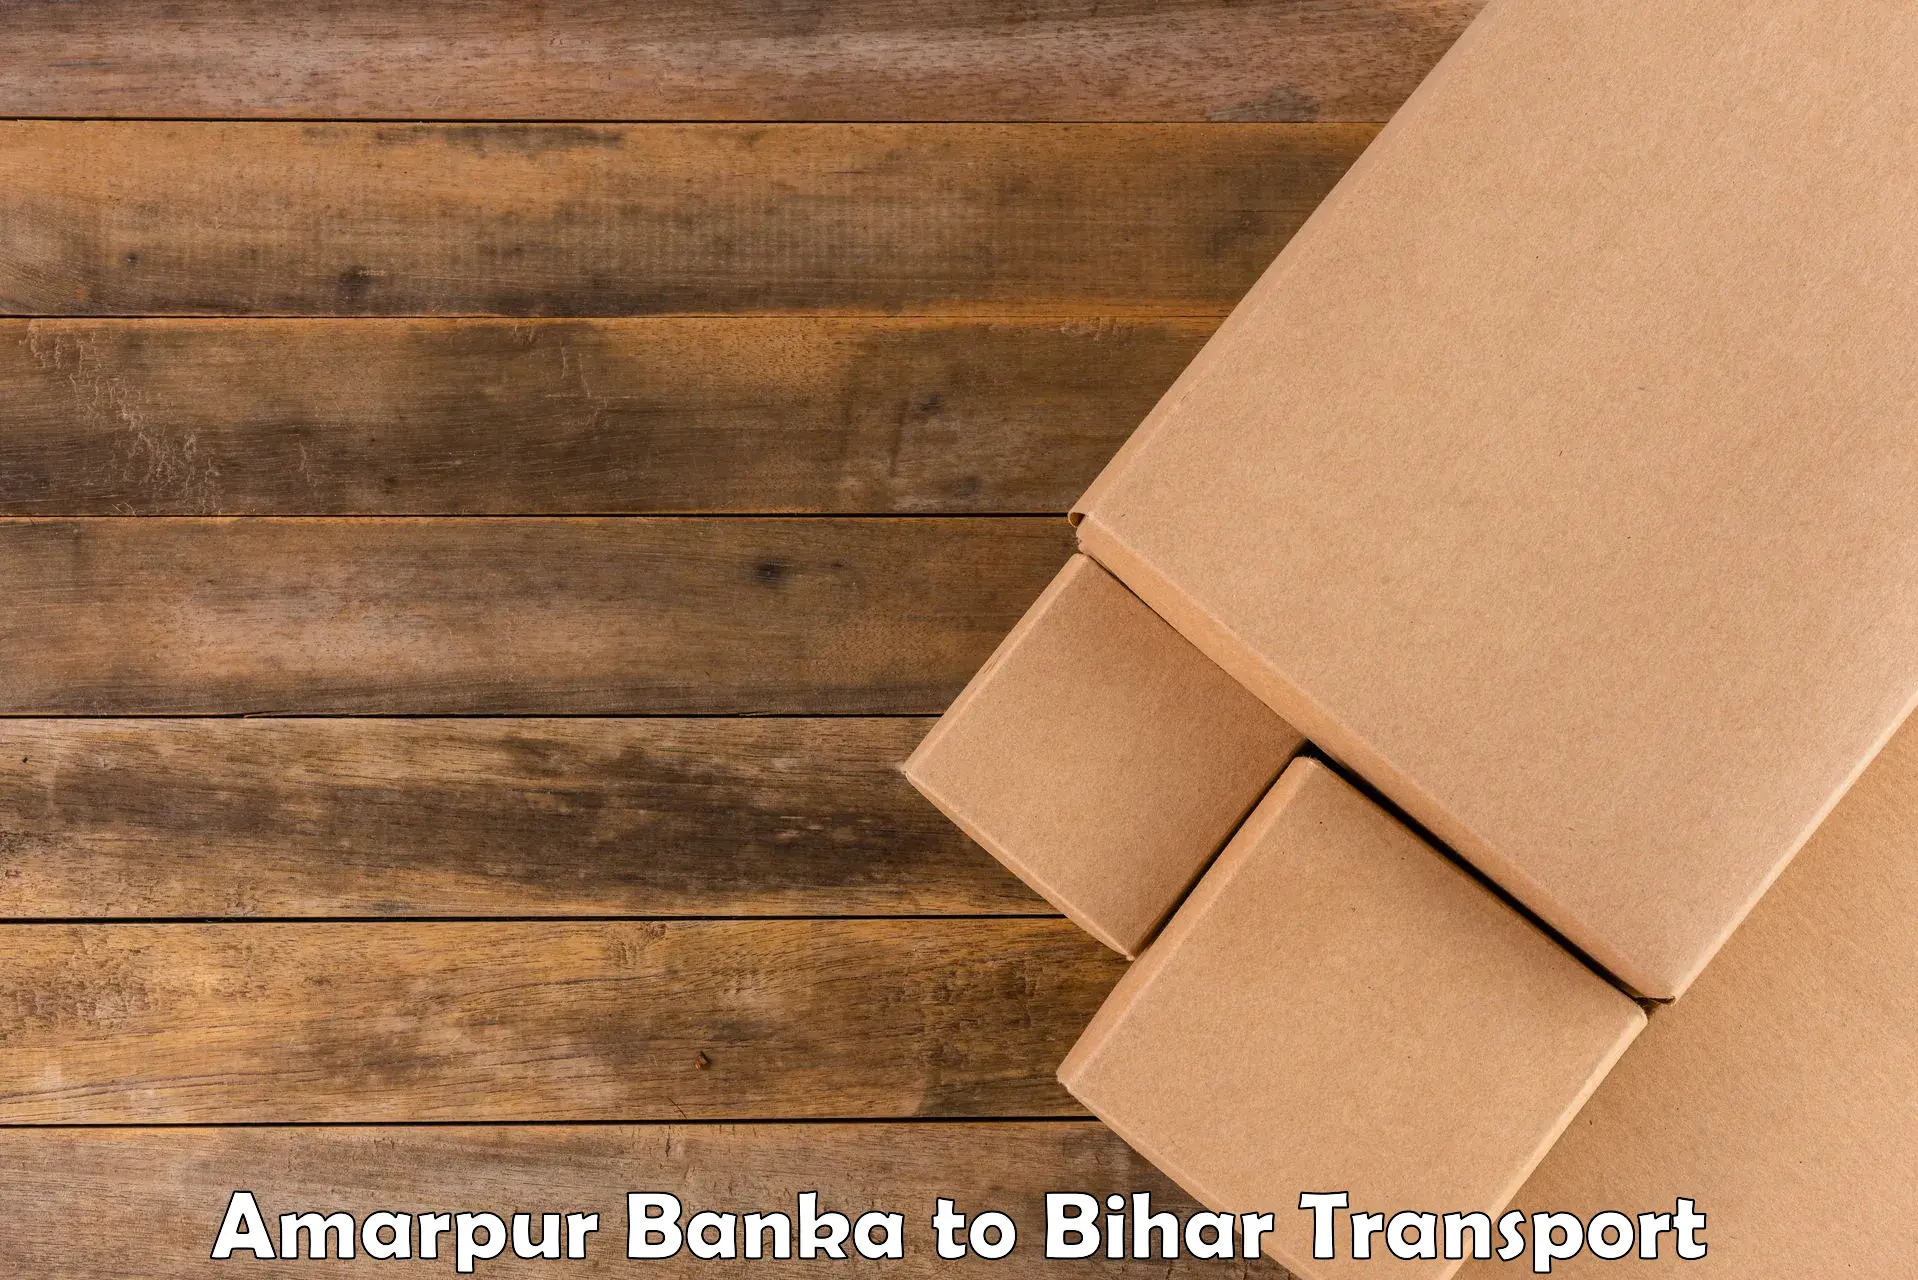 Container transport service Amarpur Banka to Mohammadpur